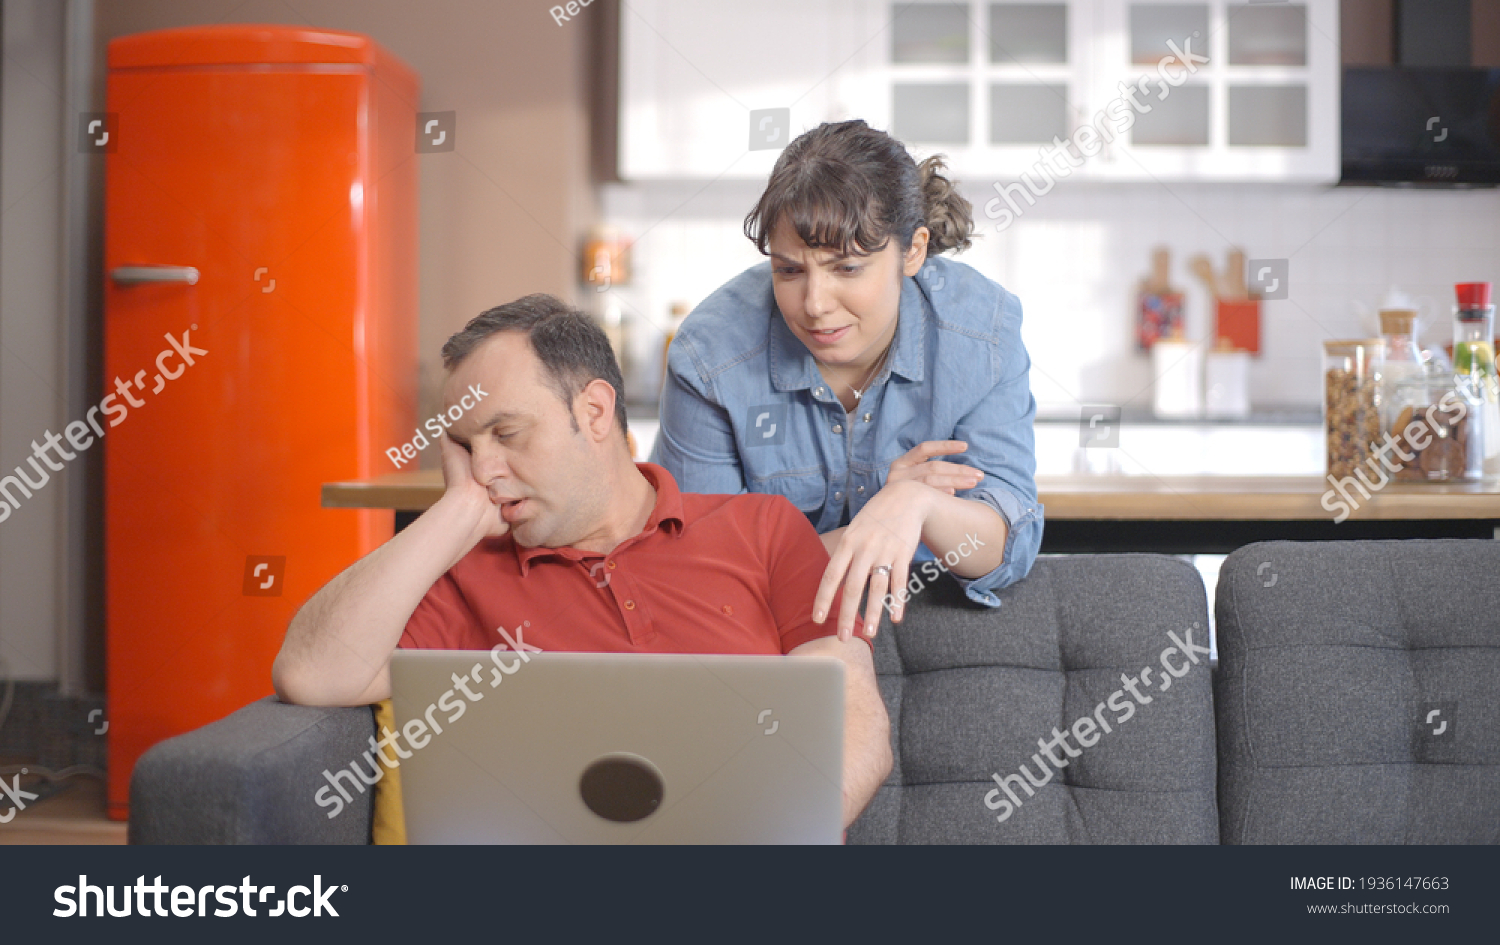 Young couple is shopping online from the computer. A young couple browsing online shopping sites looking for products. Online shopping concept.  #1936147663